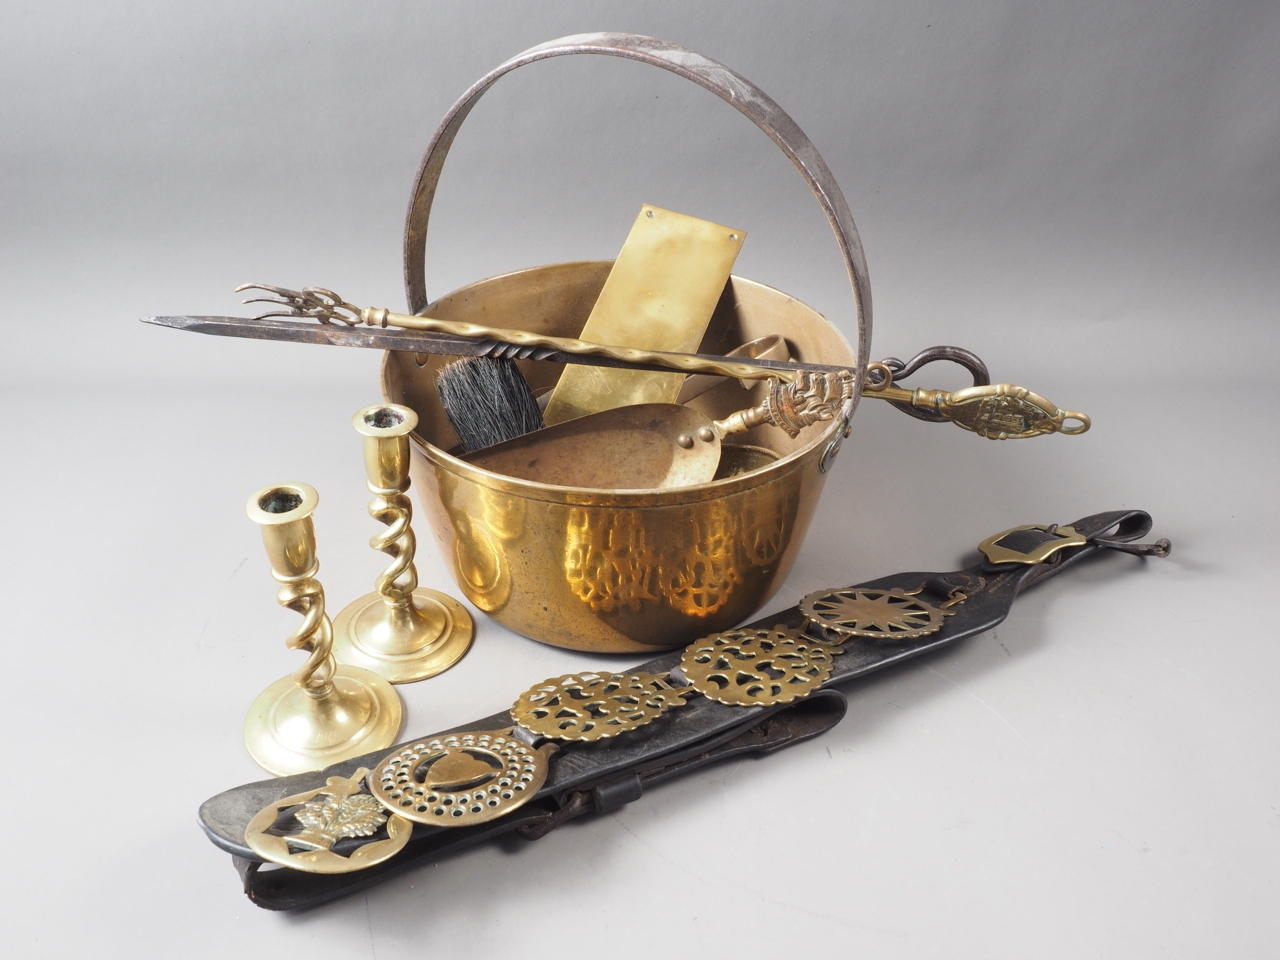 A brass preserve pan, a leather chest strap with five horse brasses and other brassware